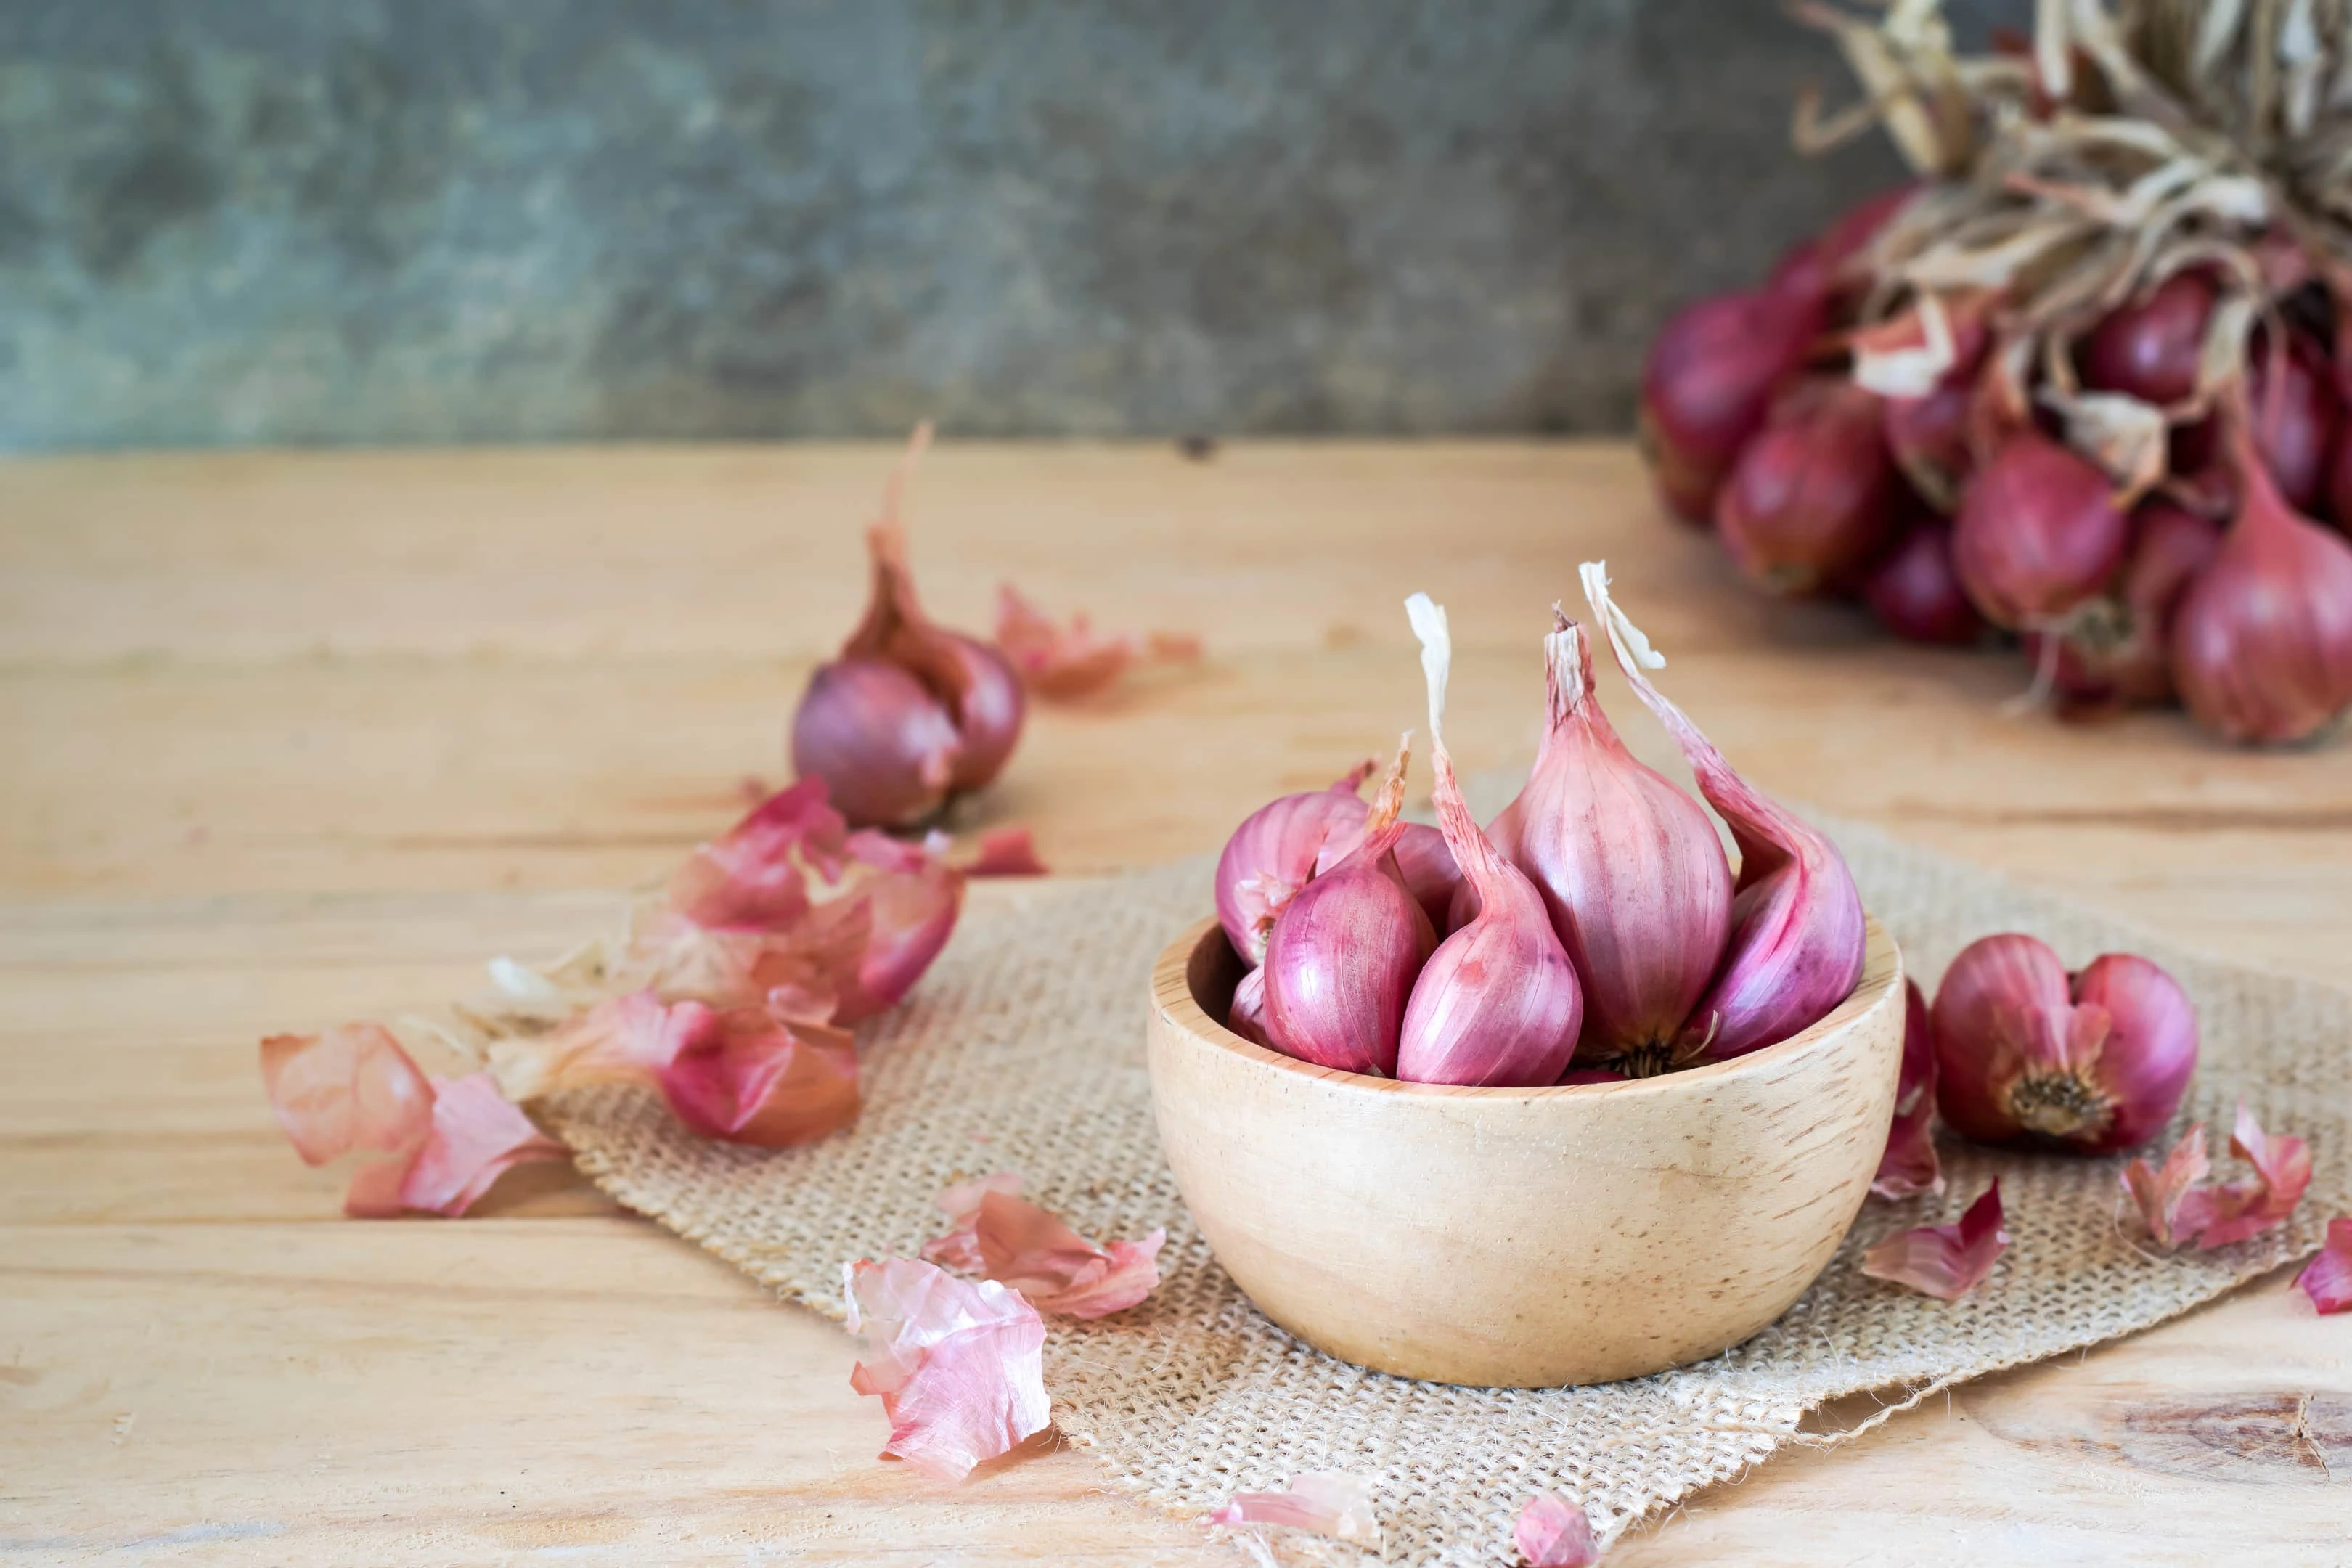 Shallots in bowl on wooden table and shallots bouquet